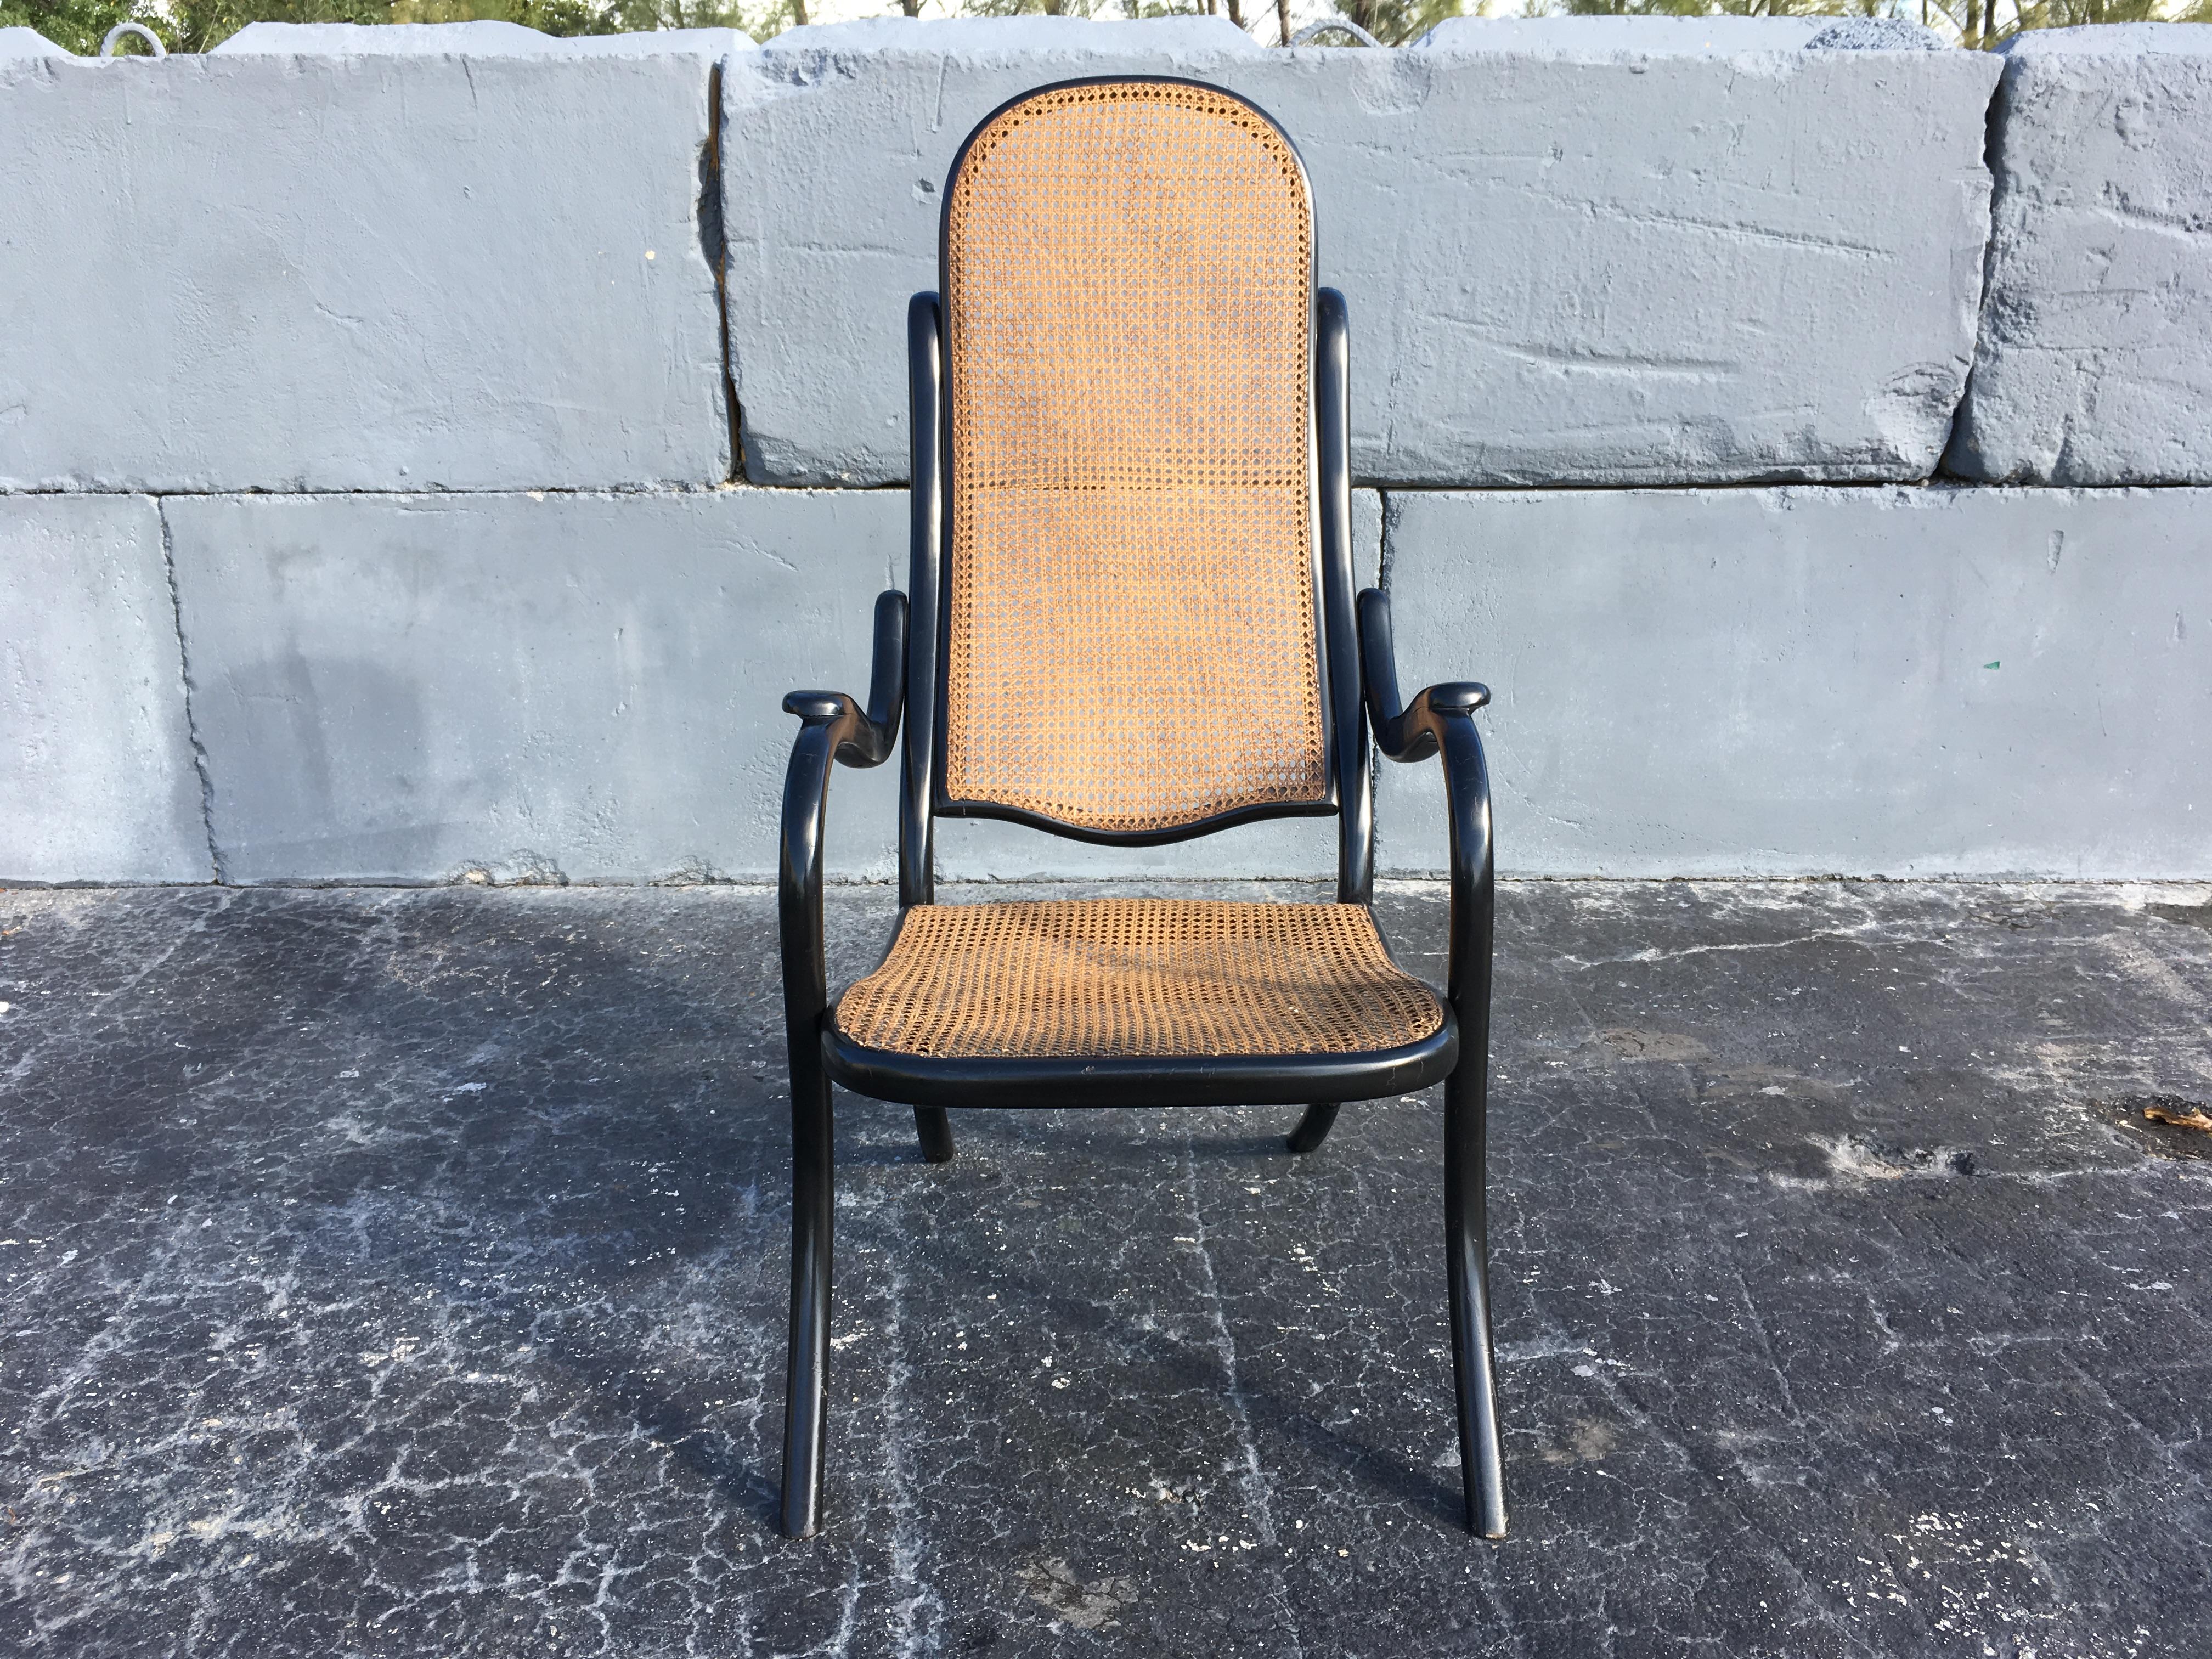 Original cane and black finish, stamped Thonet. Beautiful lines.